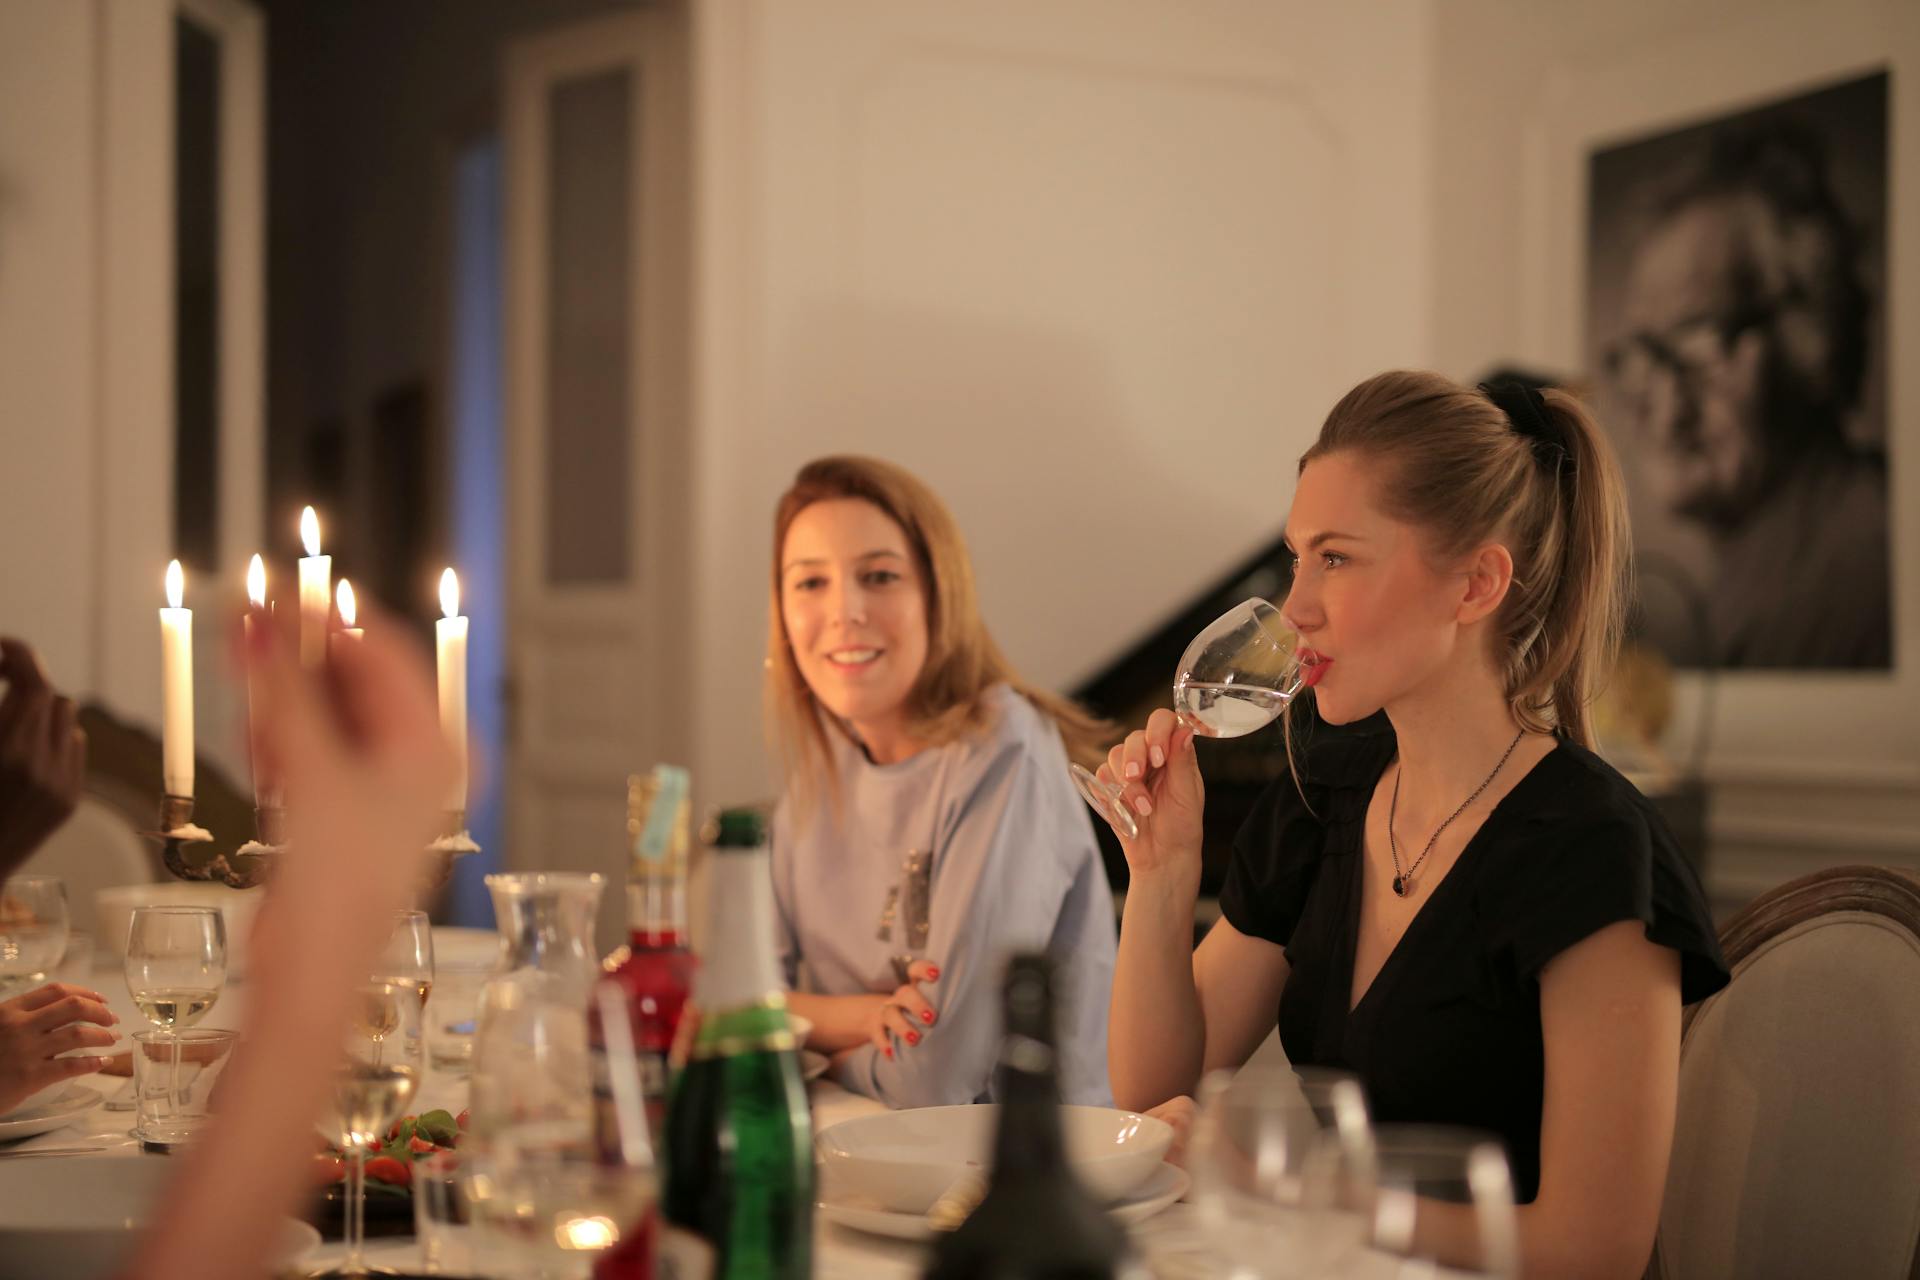 A woman drinking wine while having dinner with her friends | Source: Pexels